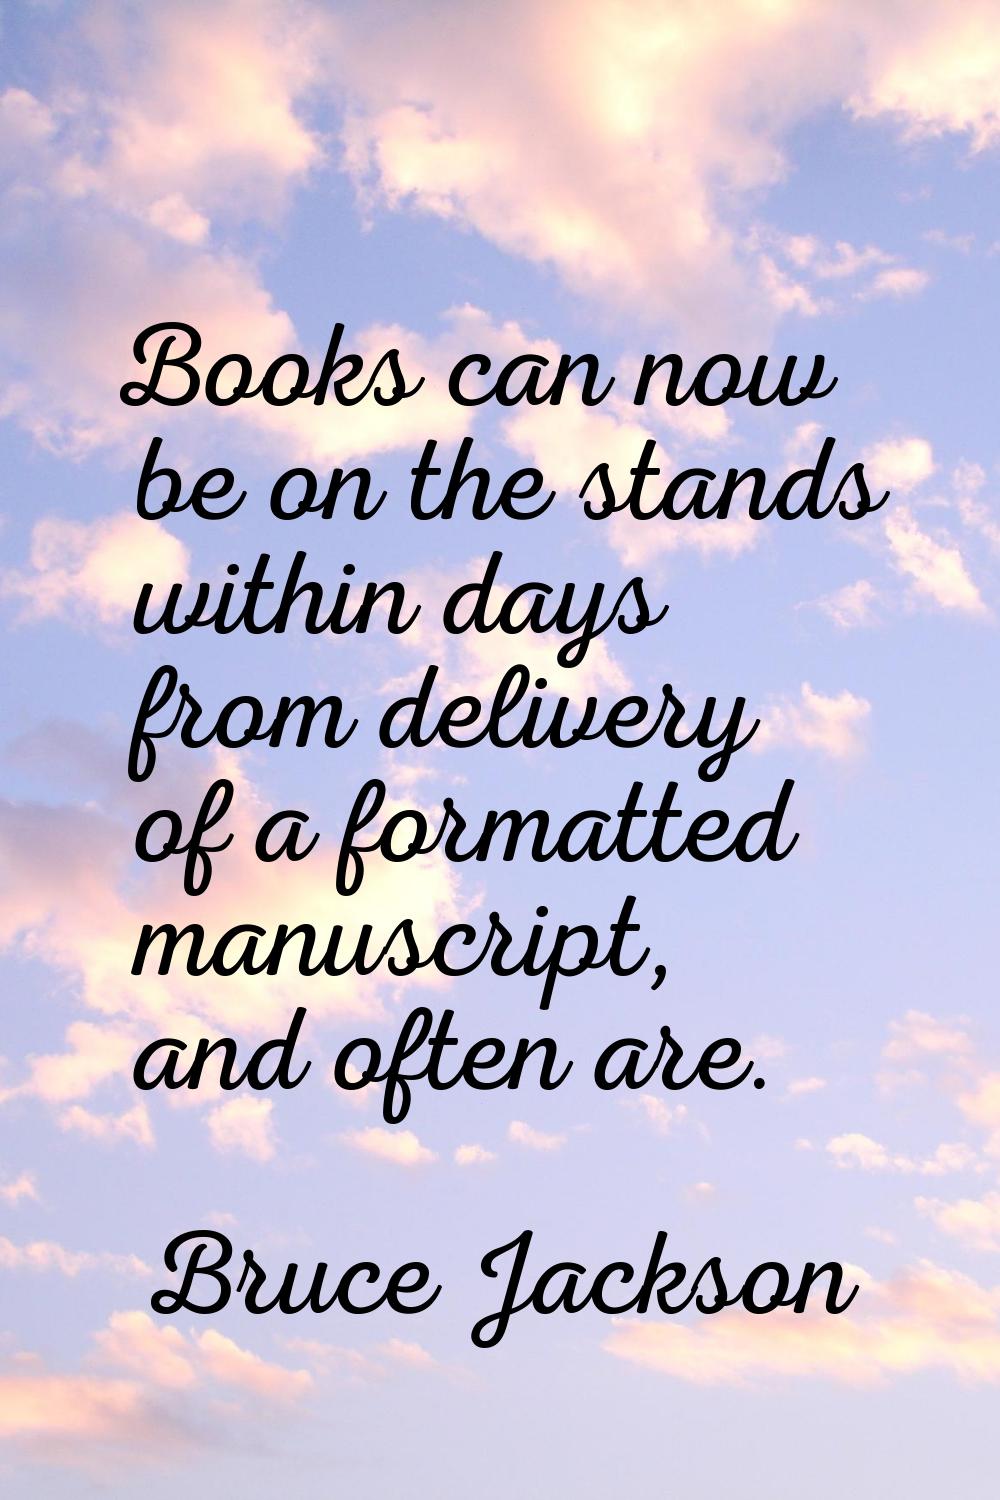 Books can now be on the stands within days from delivery of a formatted manuscript, and often are.